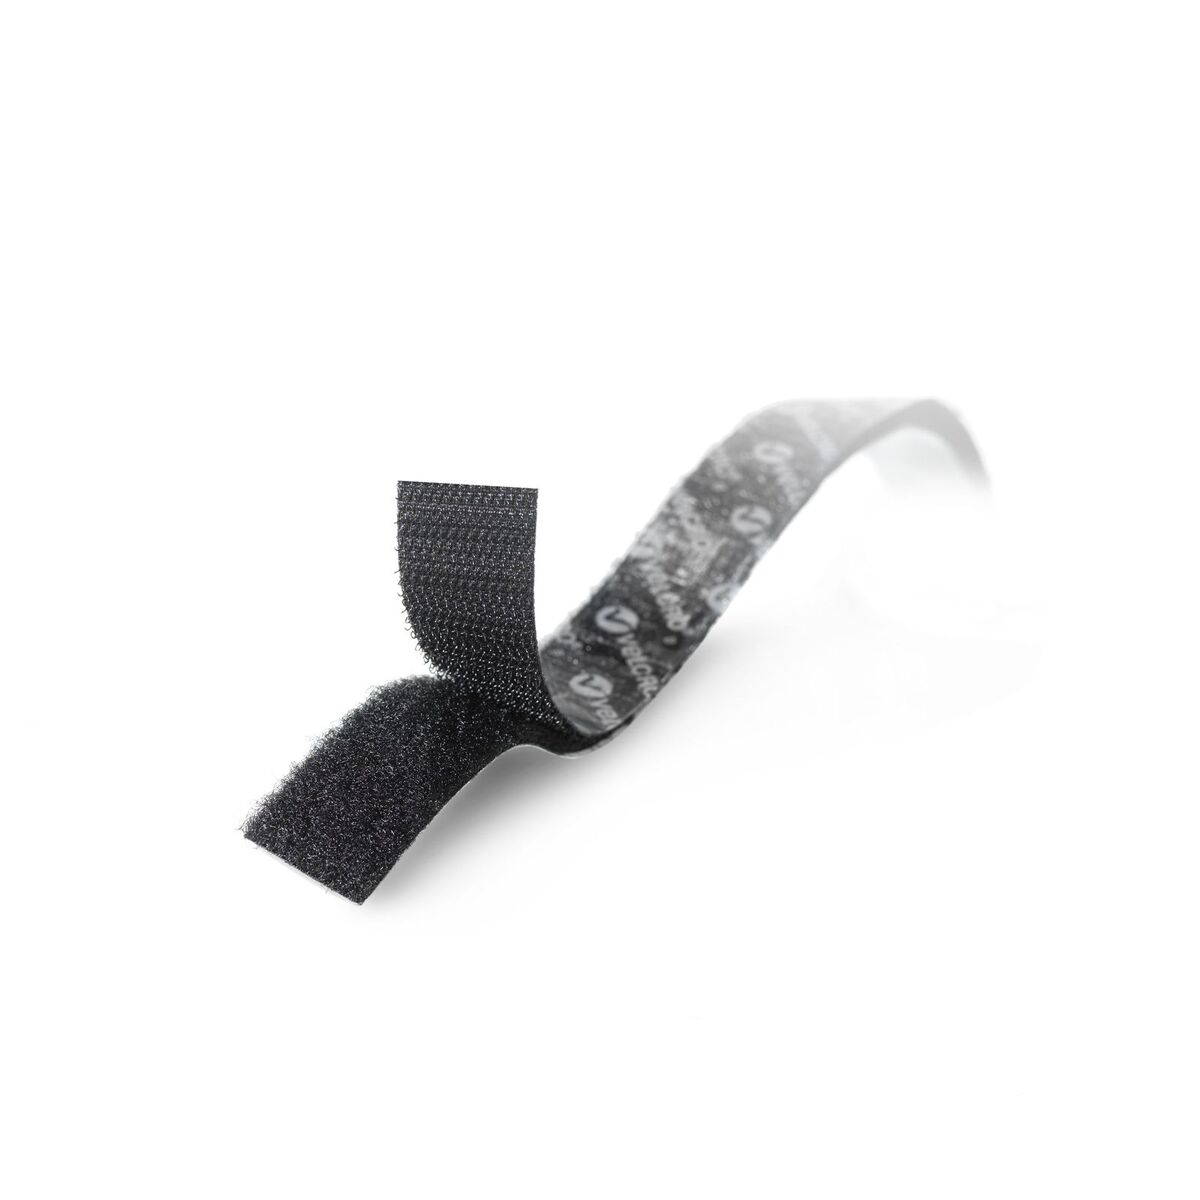 VELCRO® Brand Hook Only Strip Fasteners 25mm x 3.6m White